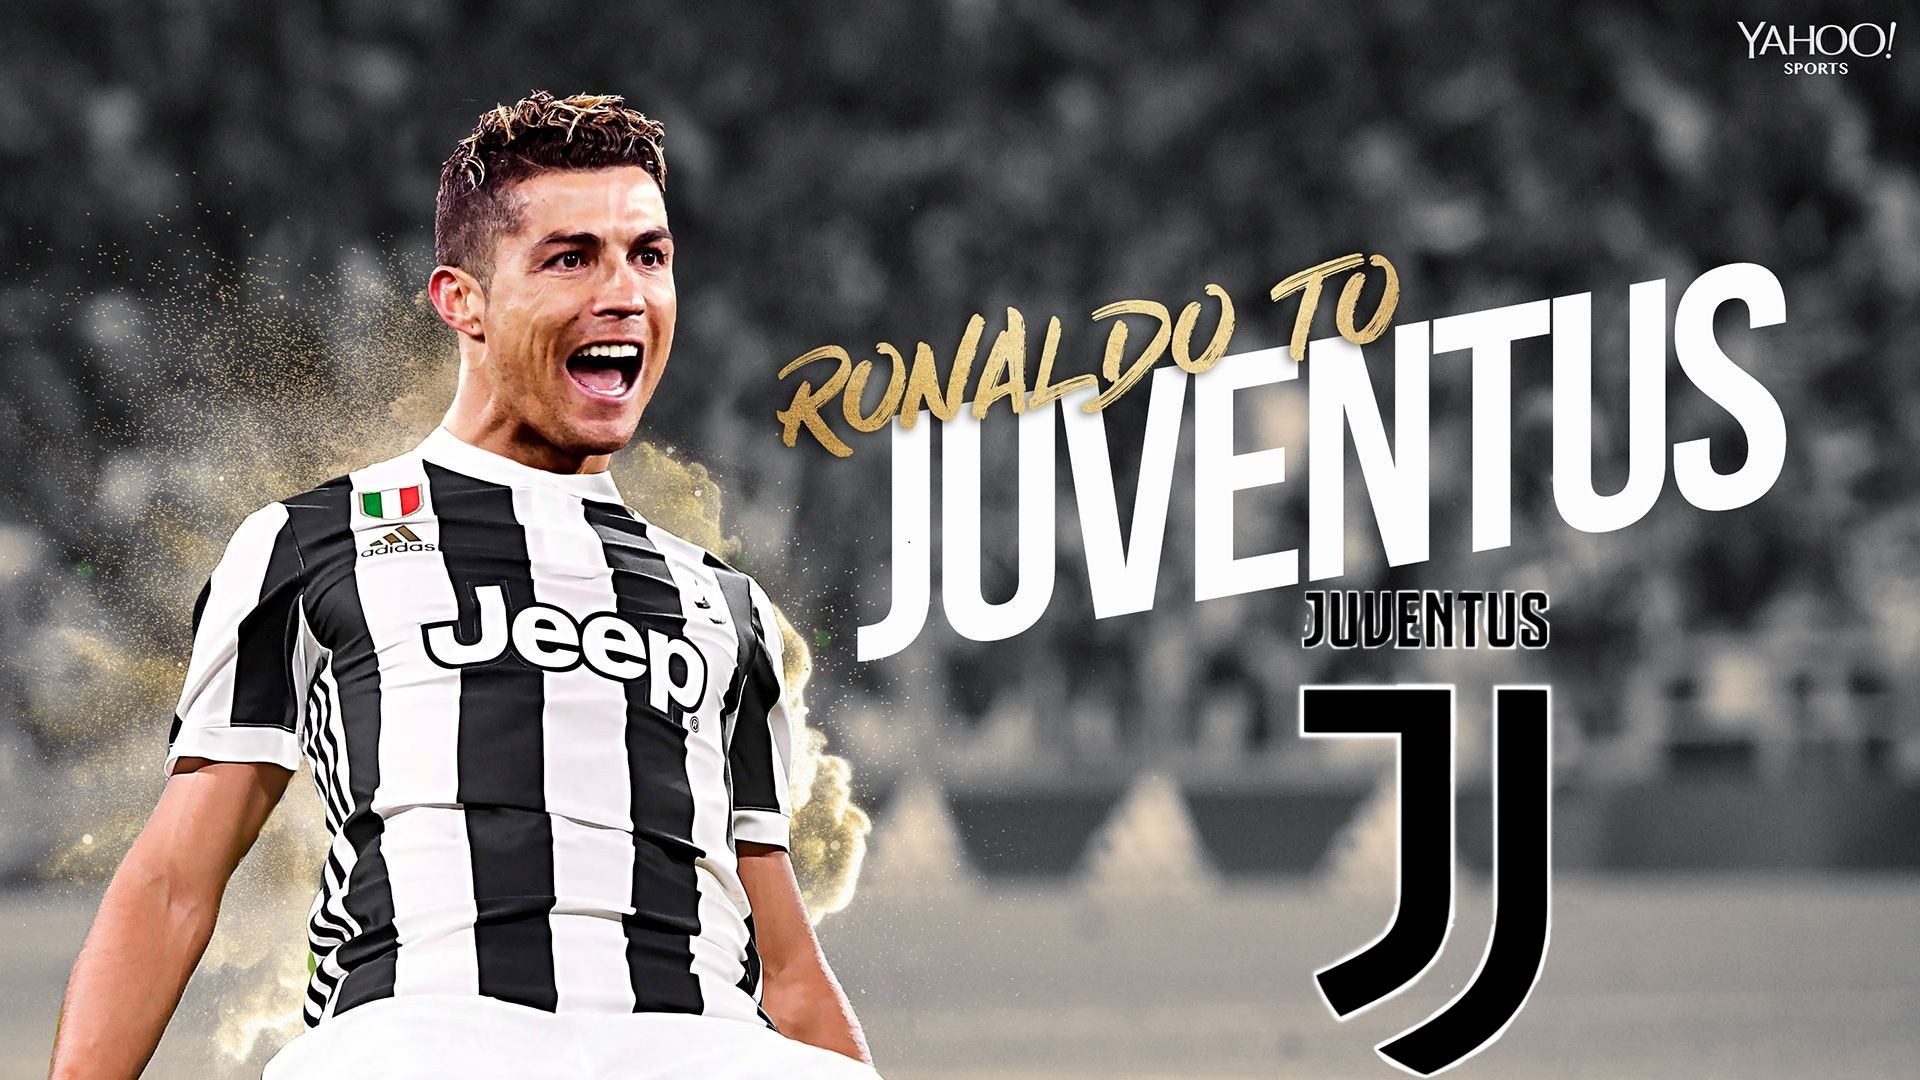 C Ronaldo Juventus Desktop Wallpapers With Resolution 1920X1080 pixel. You can make this wallpaper for your Mac or Windows Desktop Background, iPhone, Android or Tablet and another Smartphone device for free